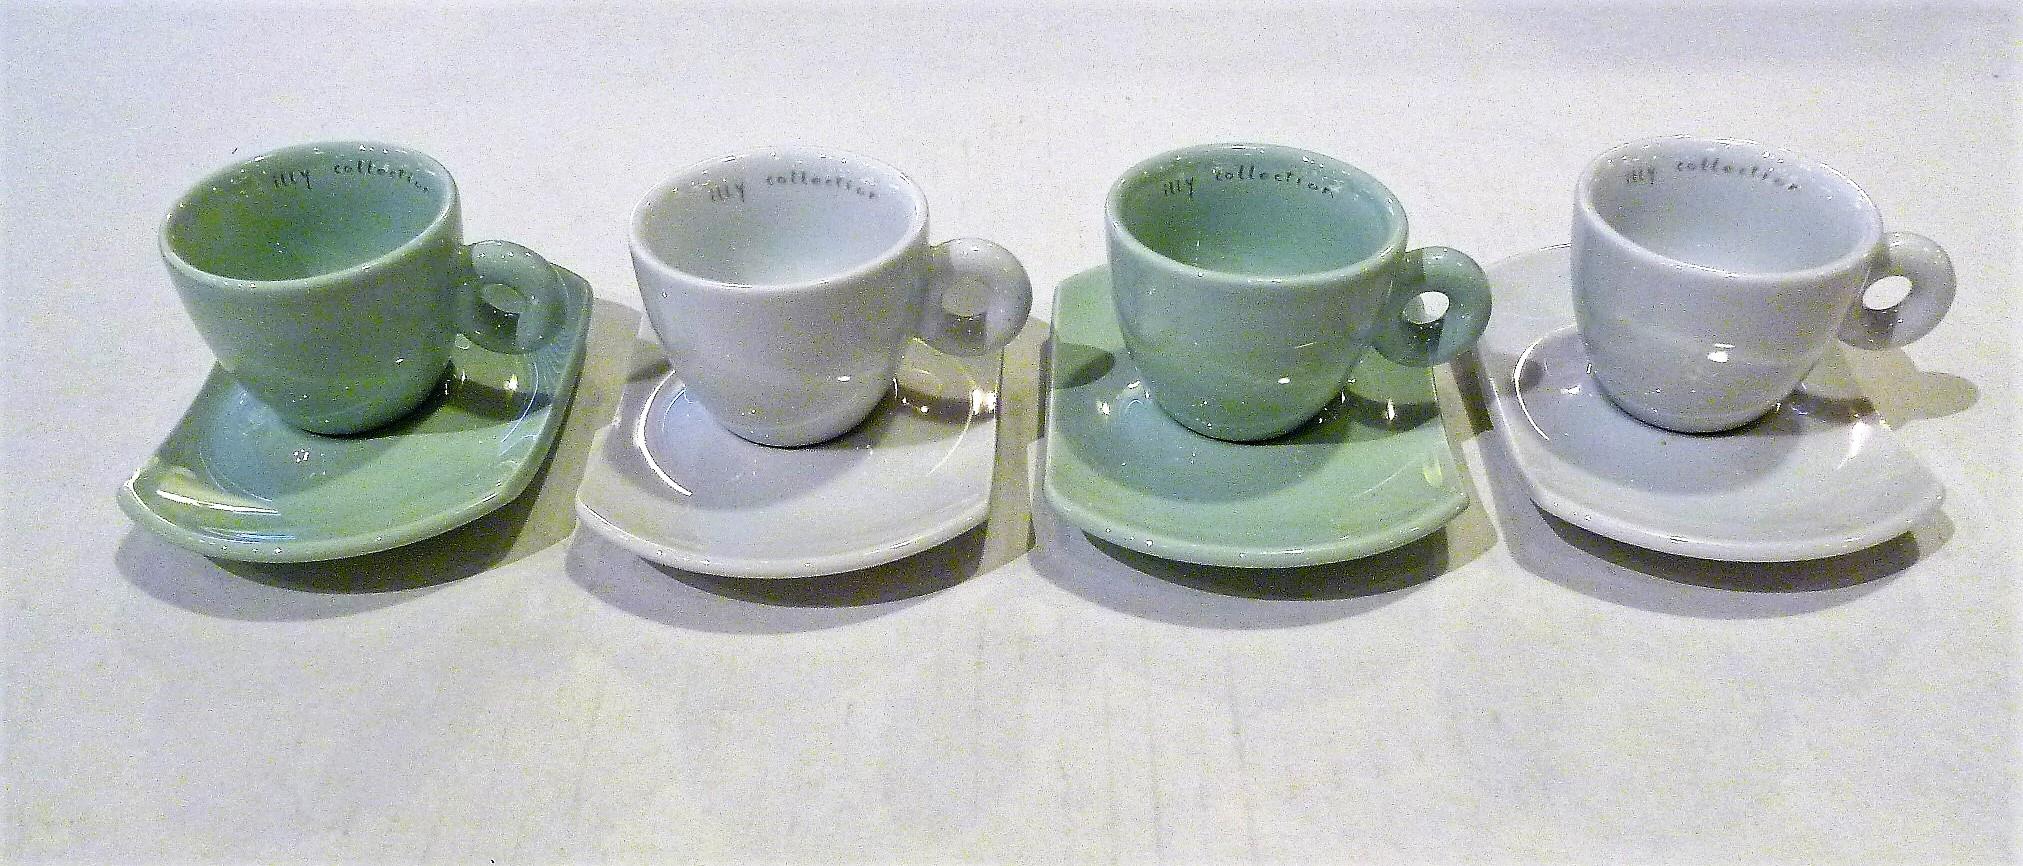 Daniel Buren Illy Collection 2004 Bianco Verde Expresso Cups and Saucers 4